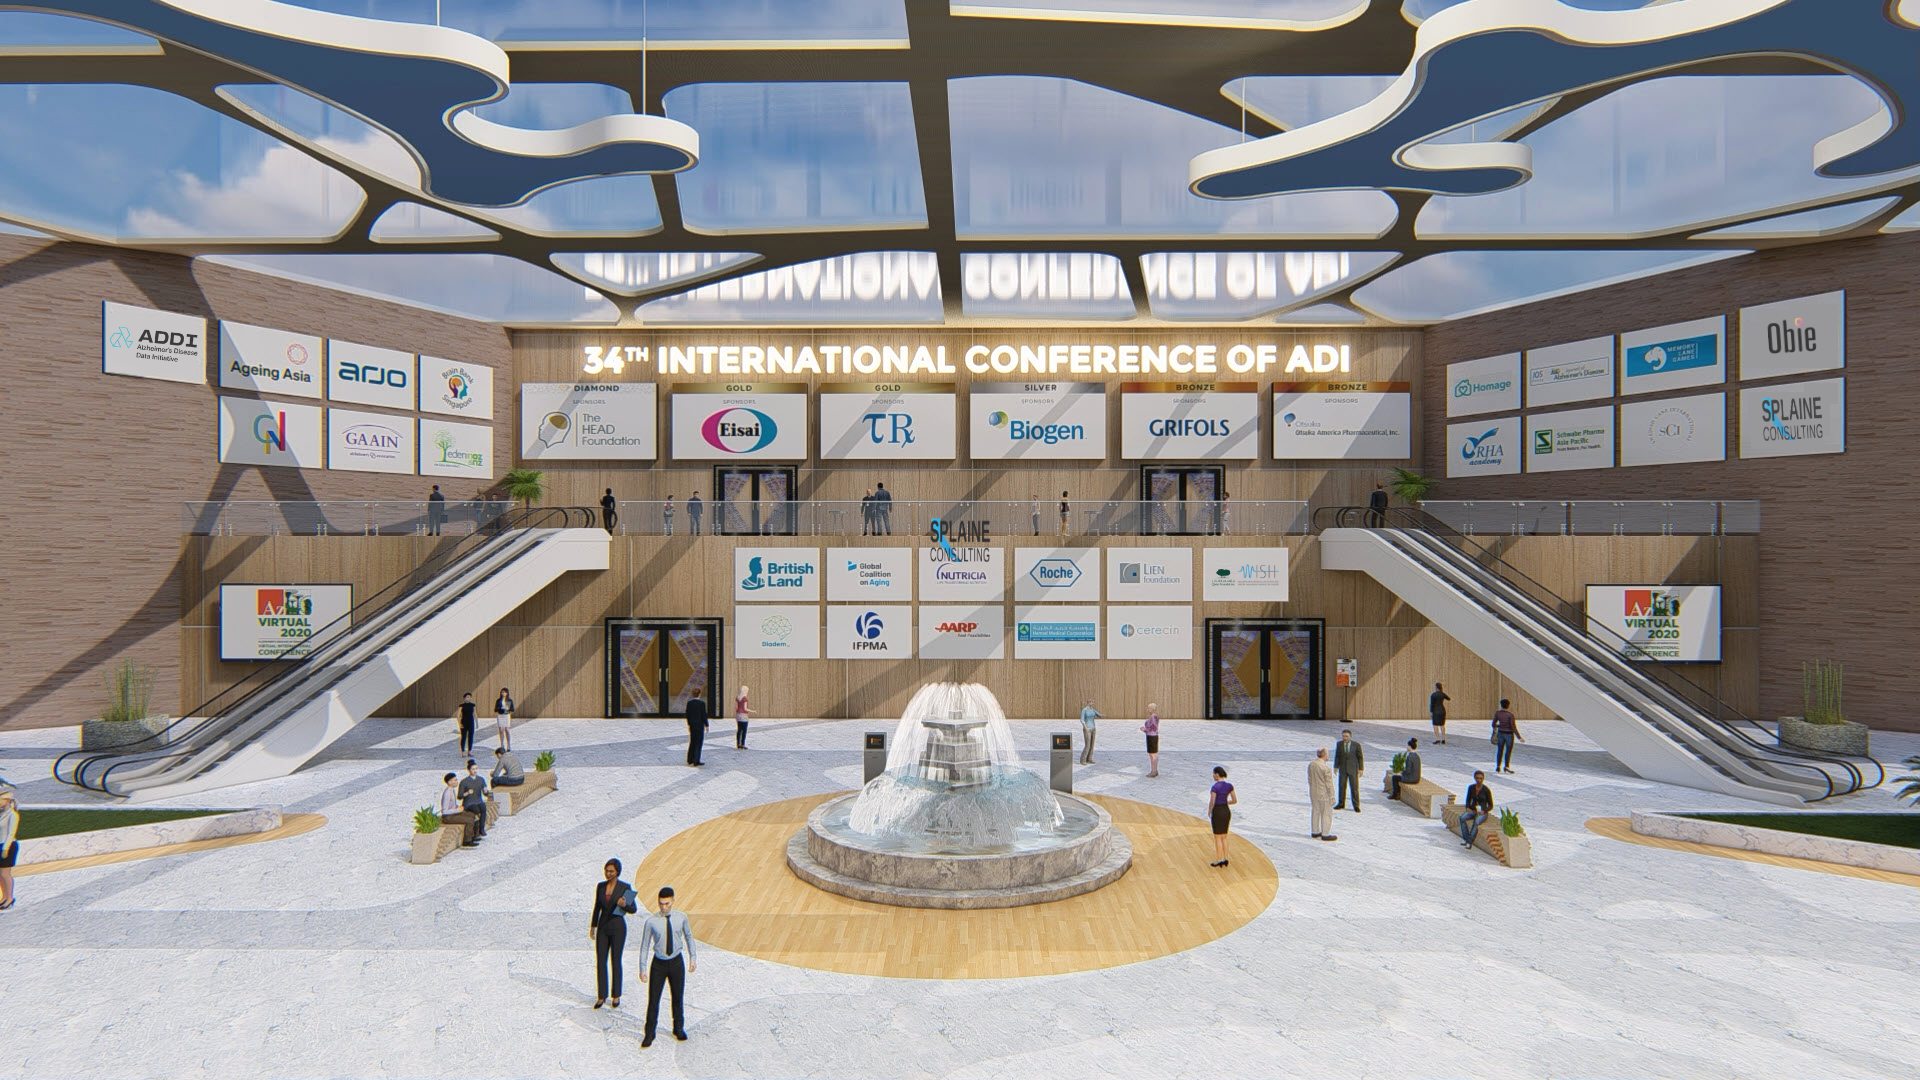 The virtual conference lobby of the 34th International Conference of ADI